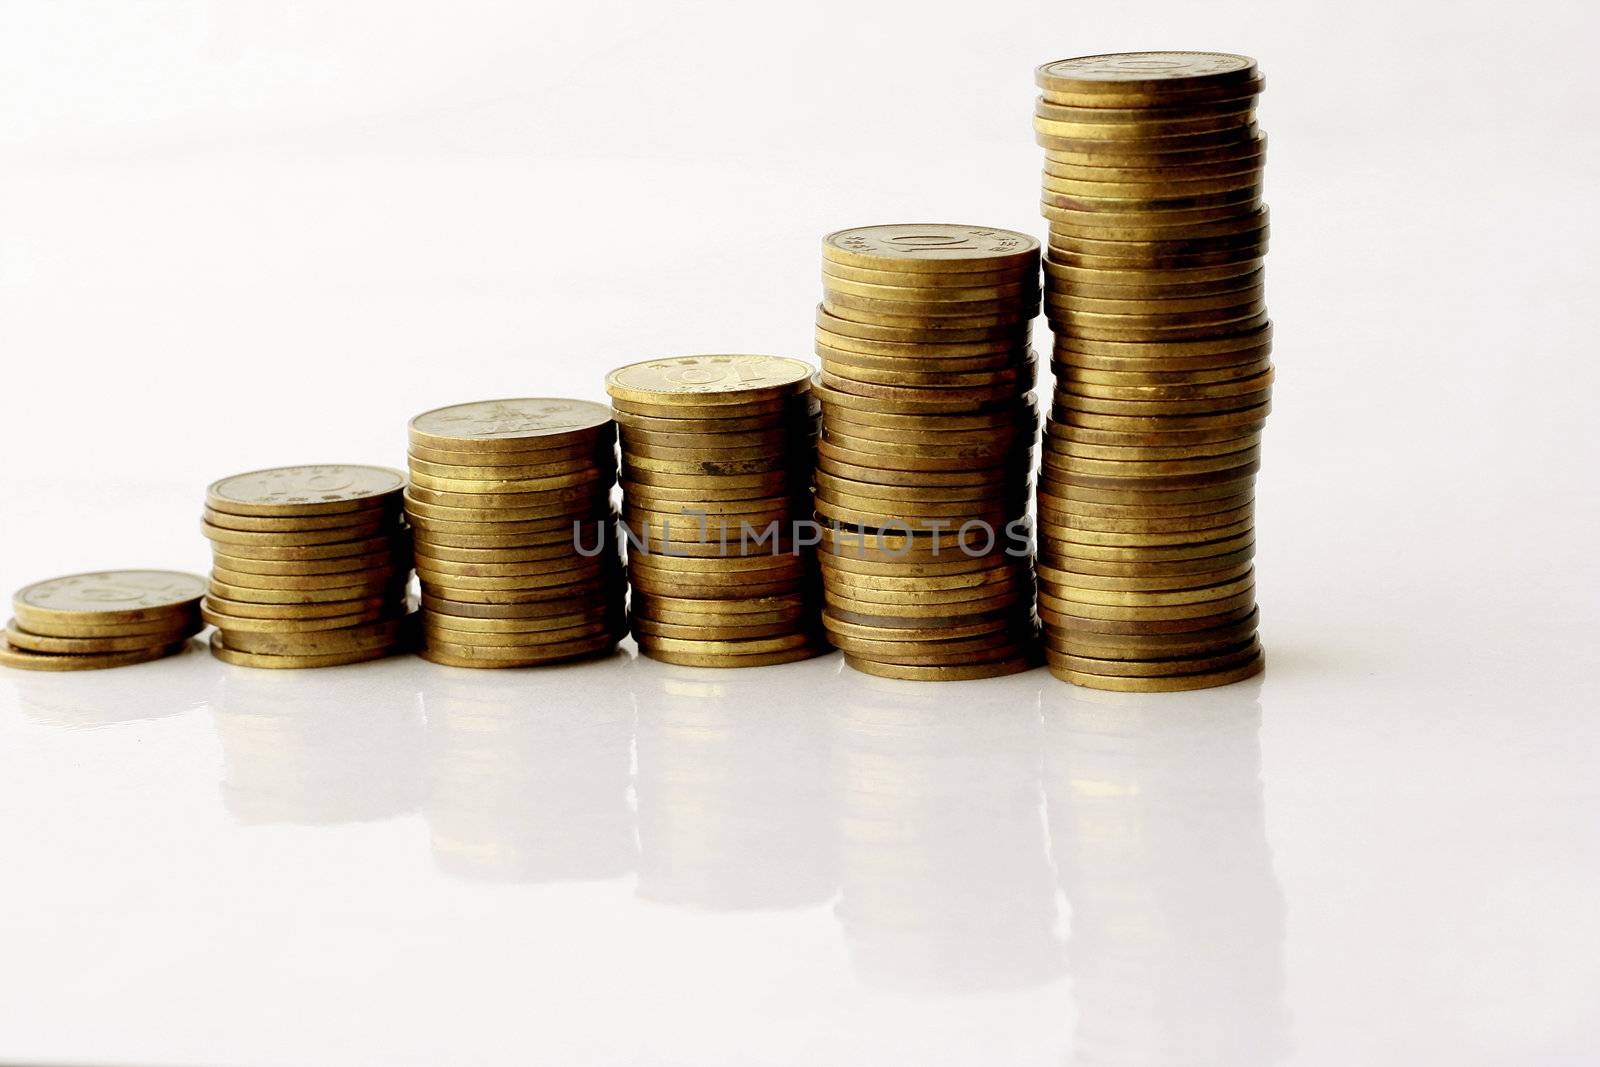 Business Concept - Coins stack up getting highier in a white background